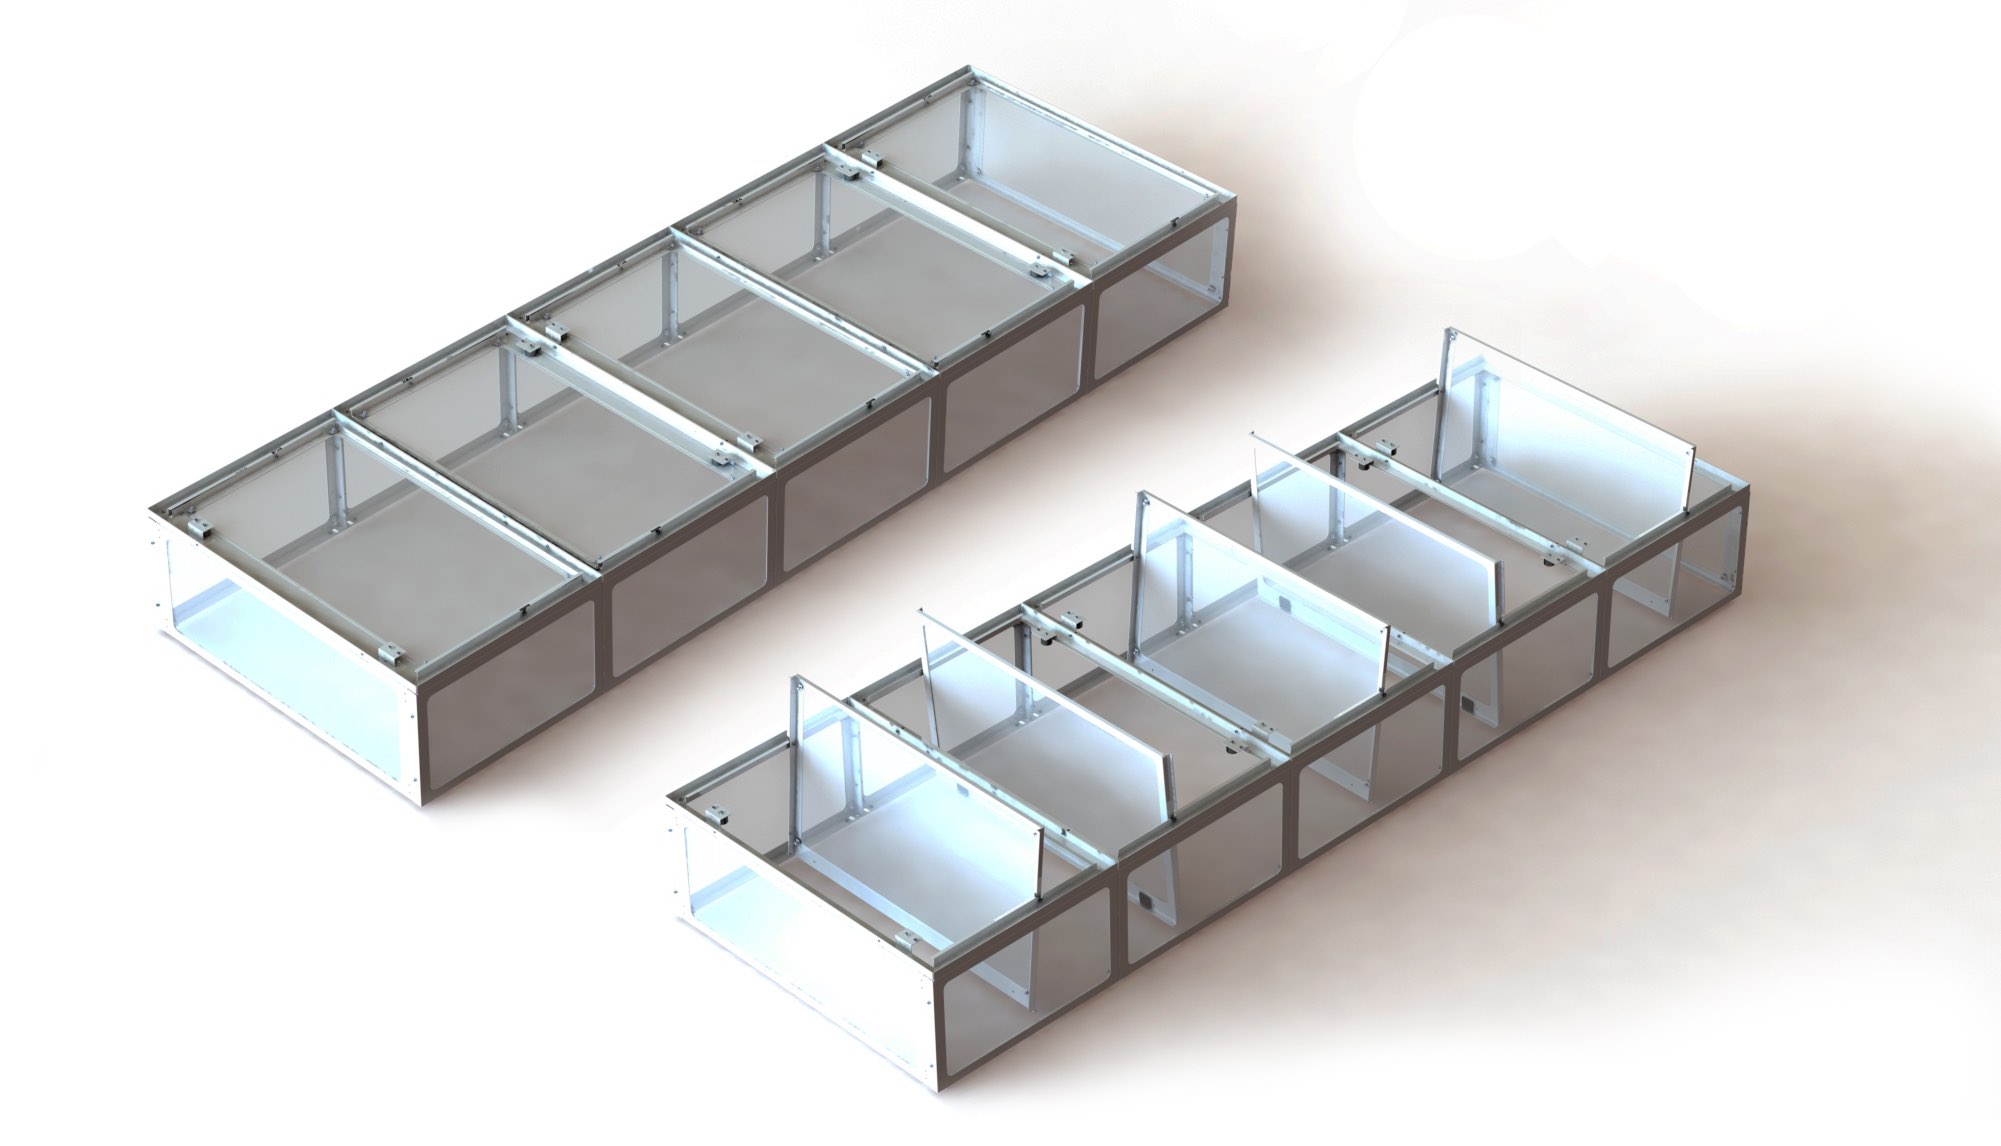 Siemon introduces active cold aisle containment solution